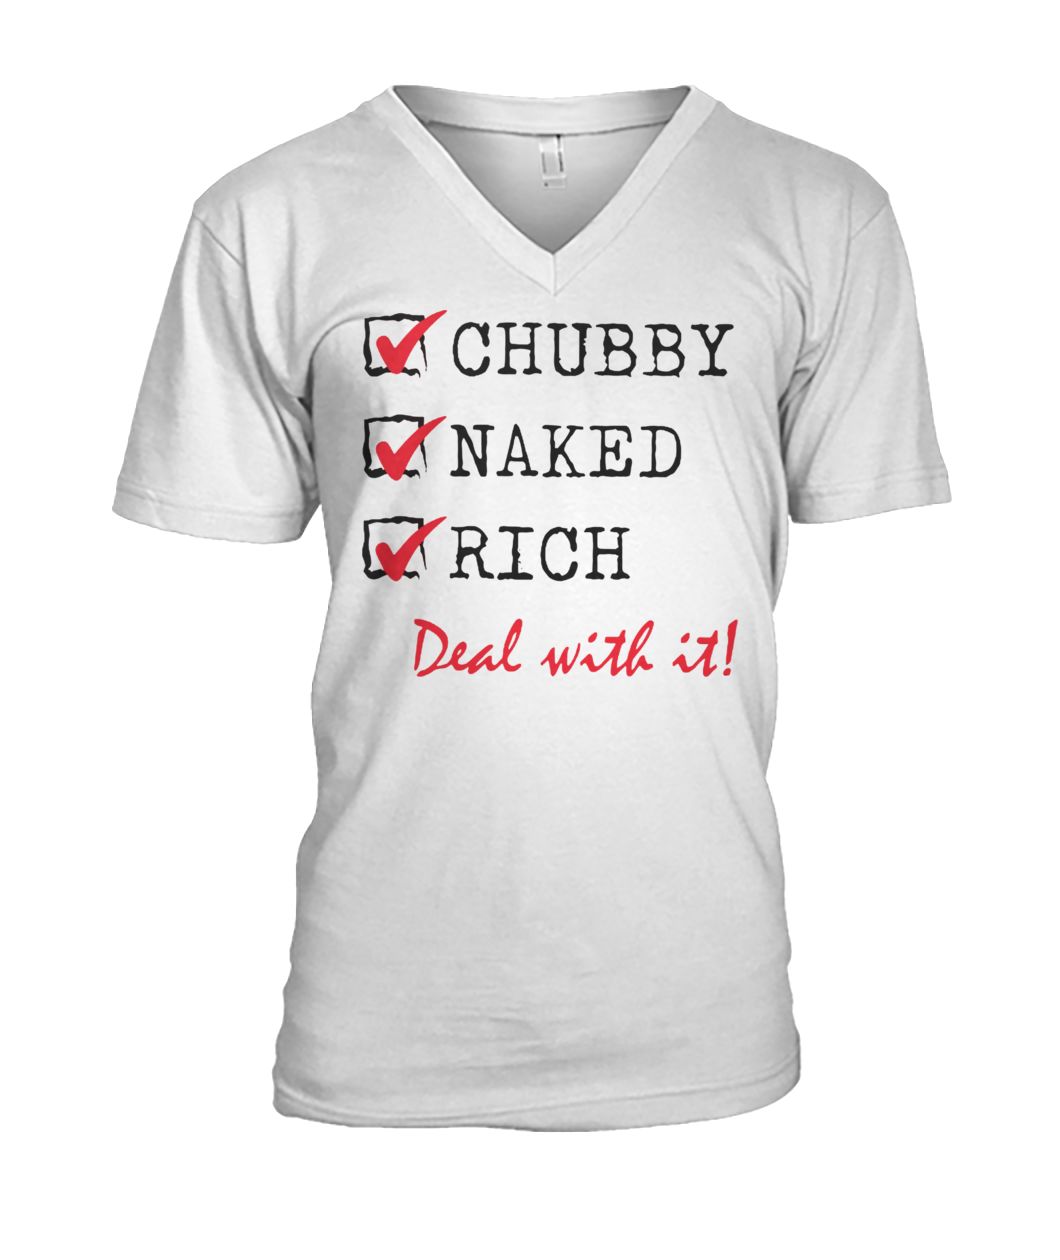 Chubby naked rich deal with it mens v-neck